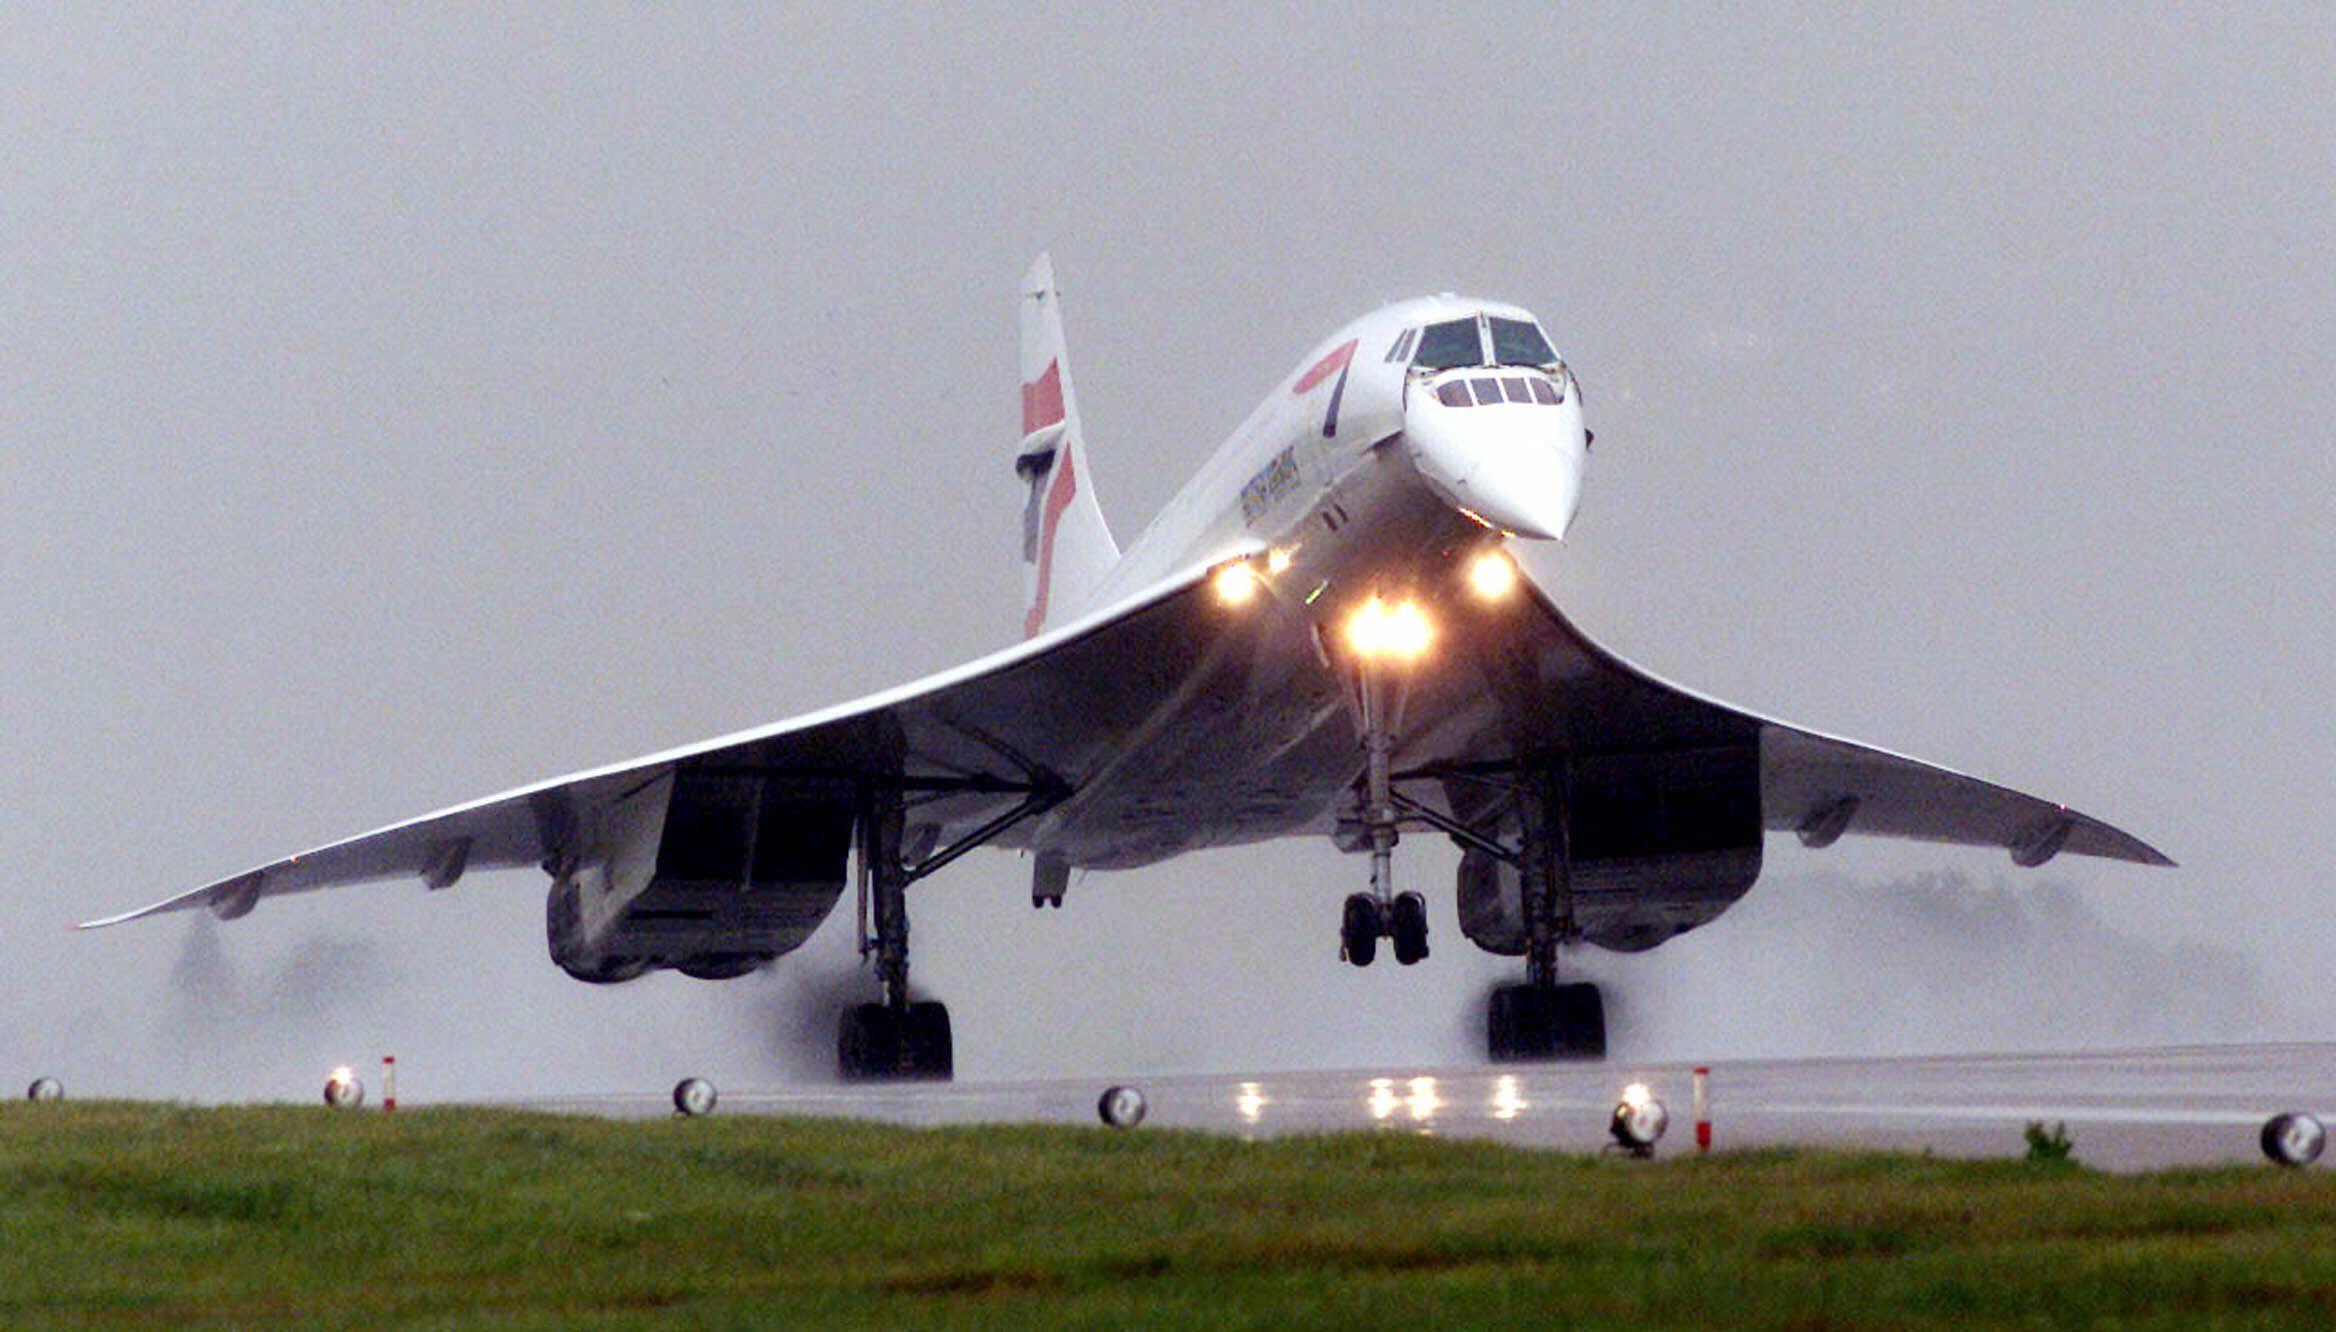 The Concorde made its first supersonic passenger flight 40 years